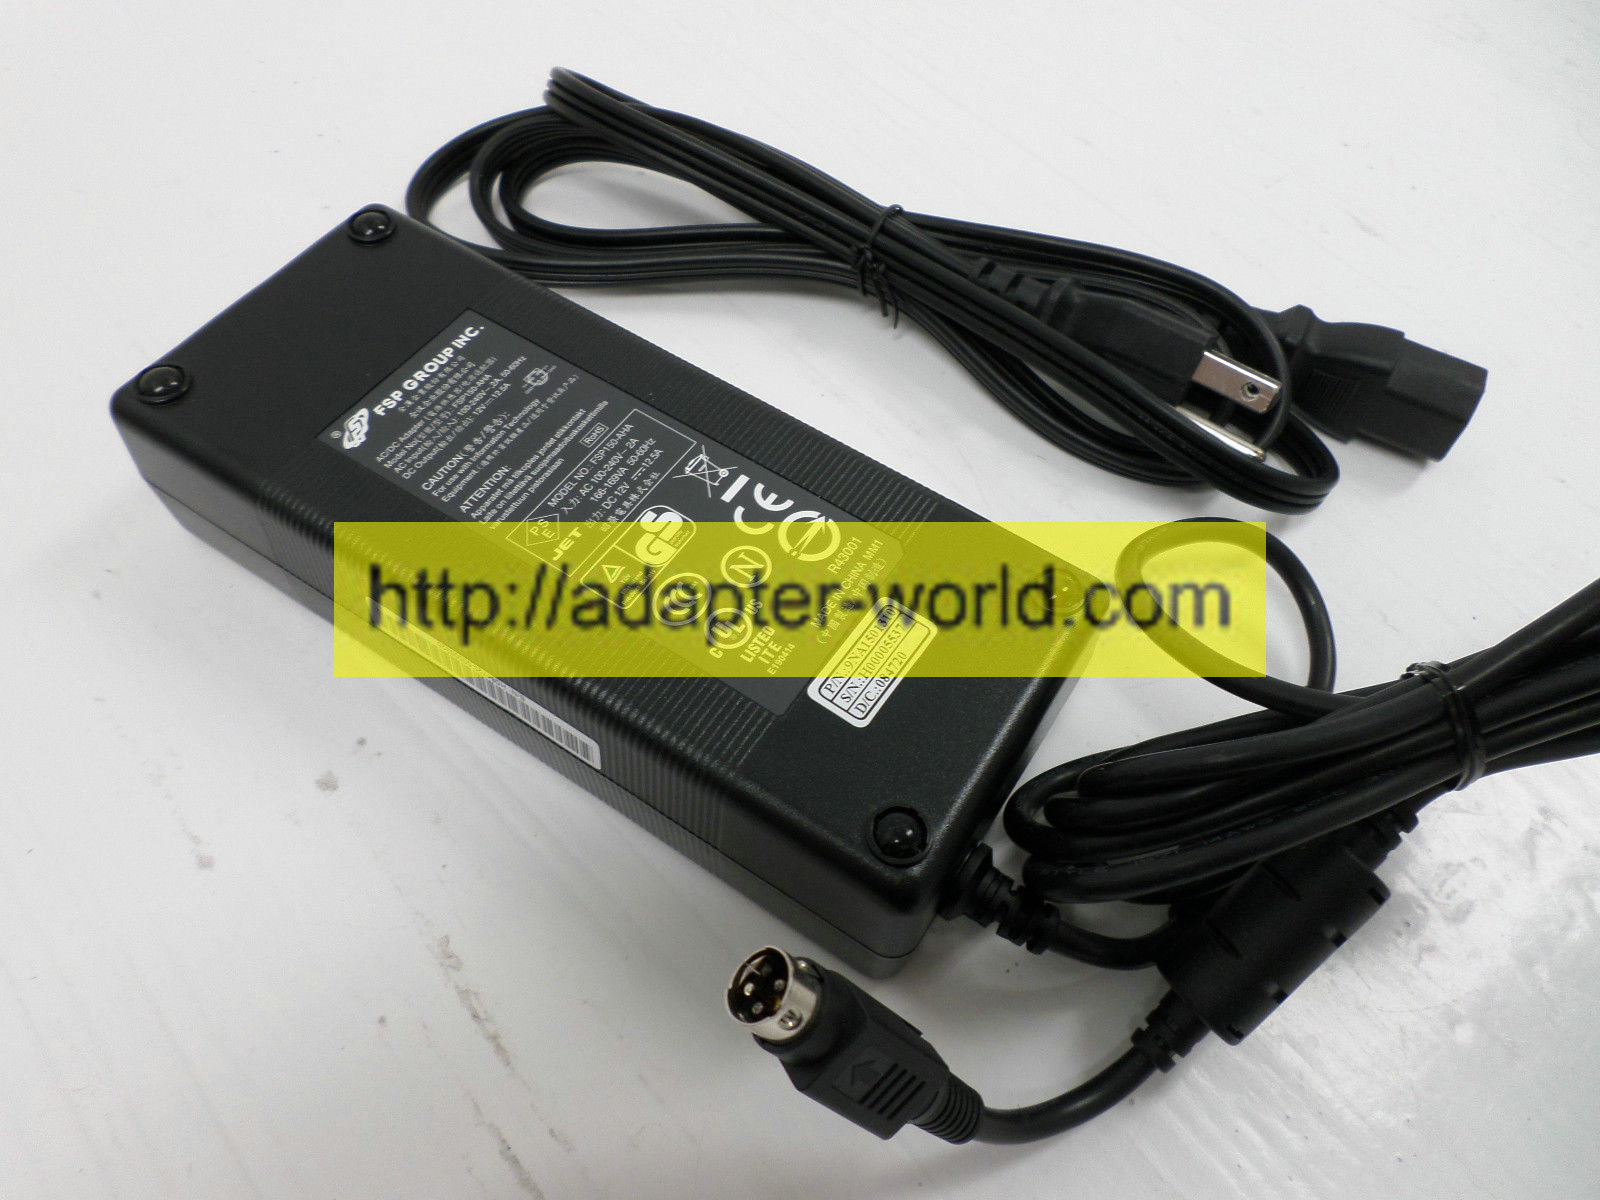 *100% Brand NEW* FSP Group Inc 12V 12.5A 4 Pin FSP150-AHA 9NA1501310 AC Adapter Free shipping!